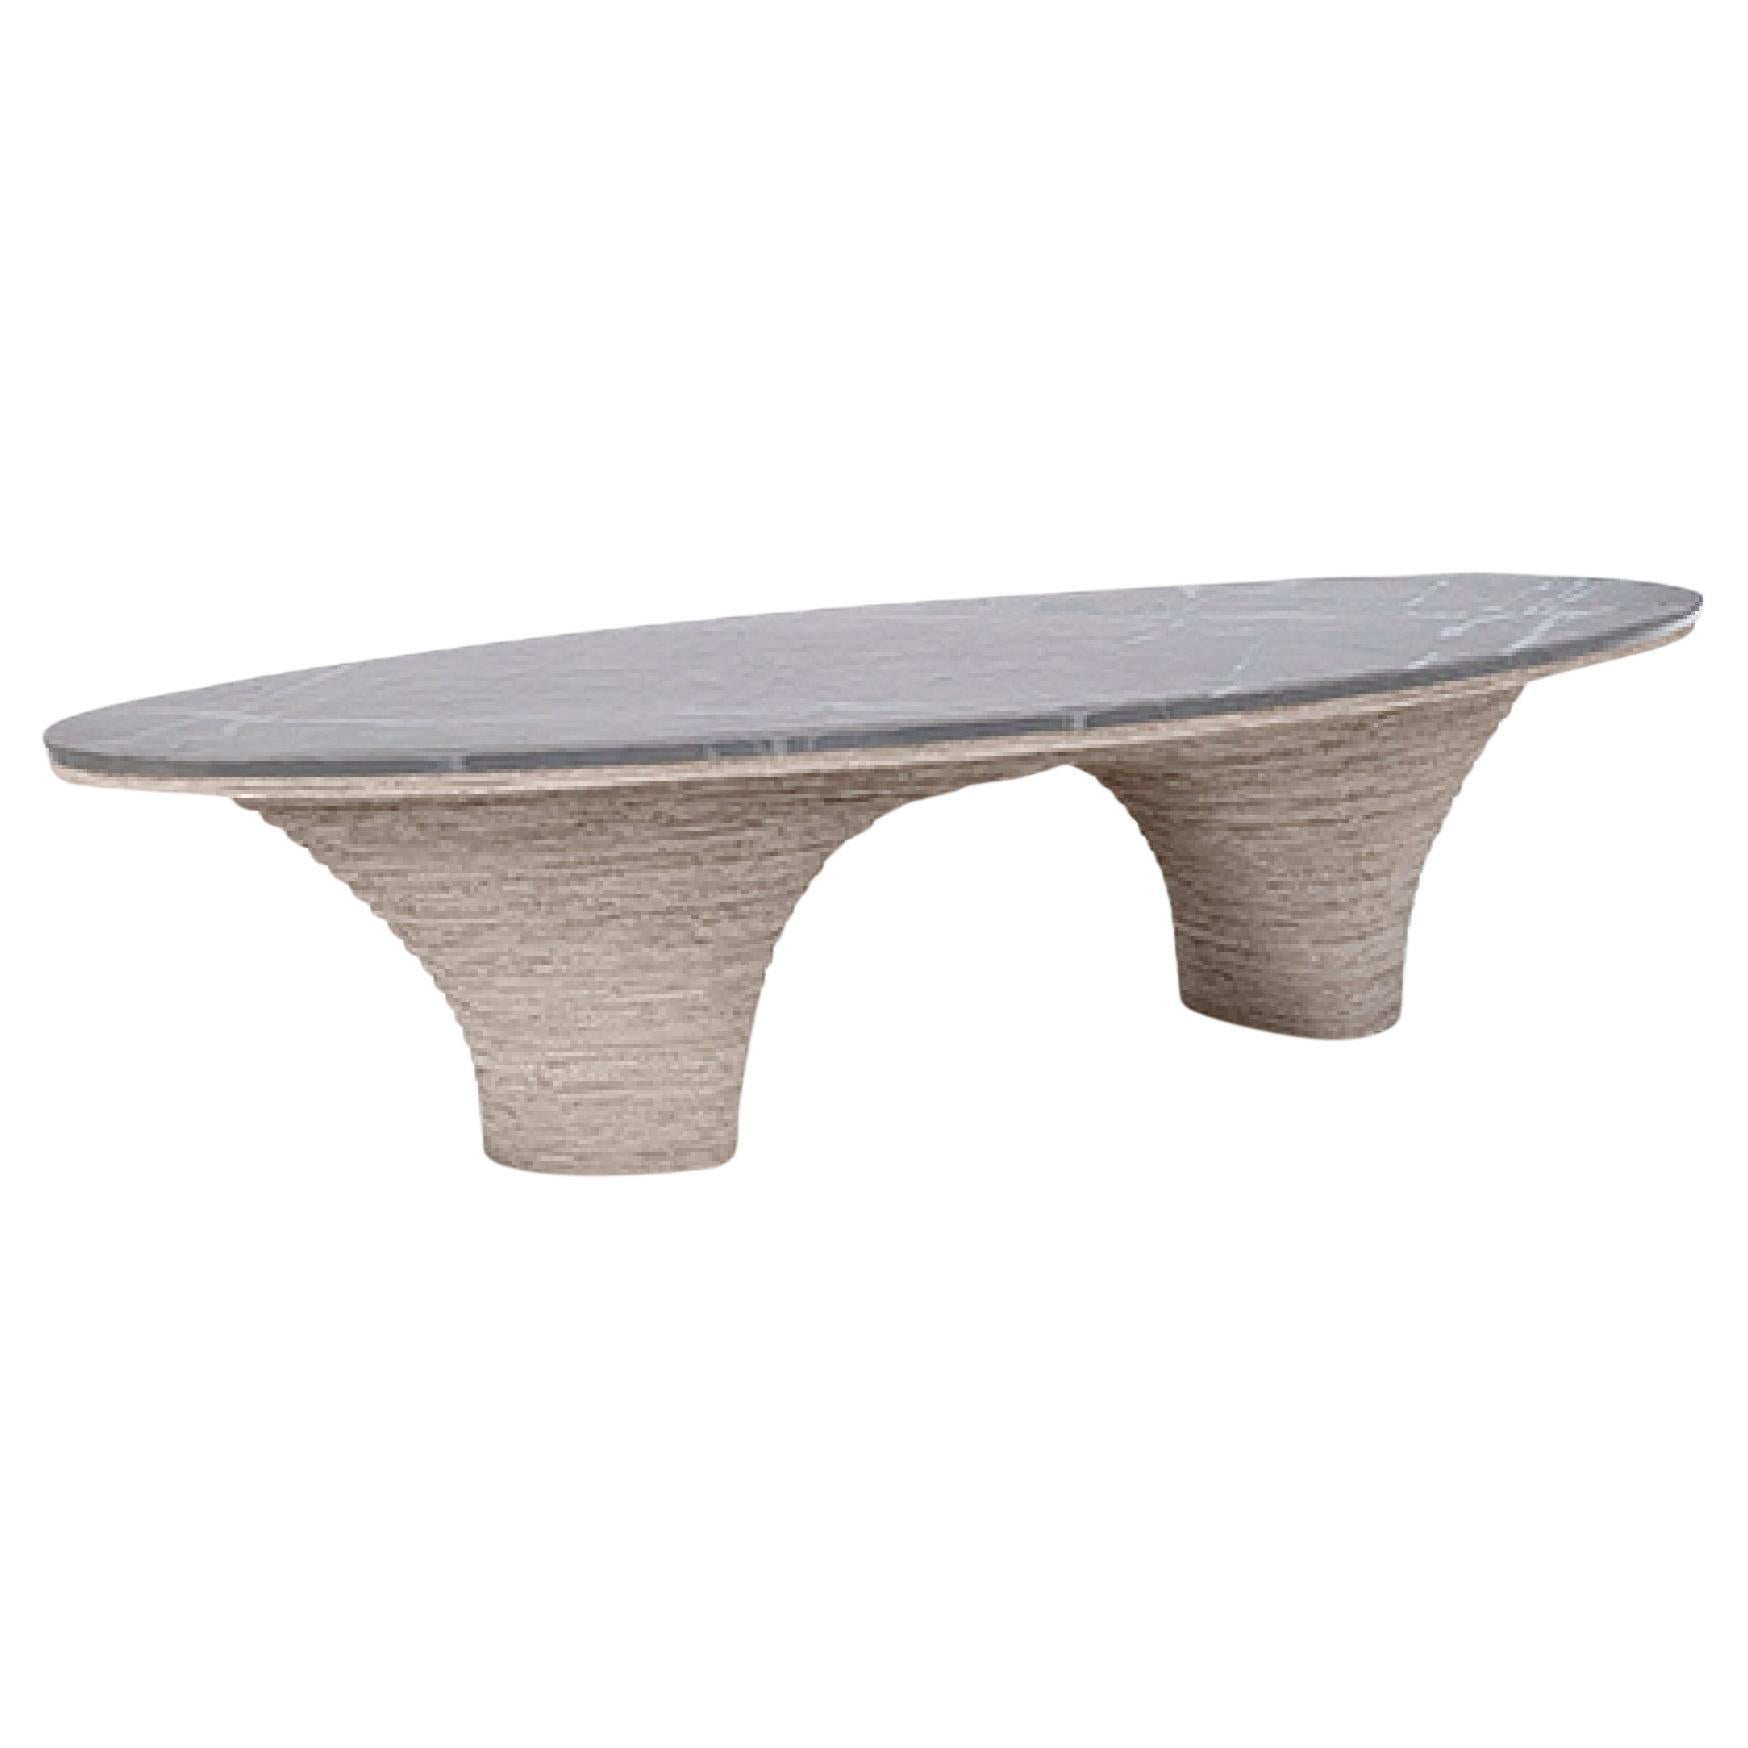 Orbit Table Medium by Piegatto, a Scultural Coffee table  For Sale